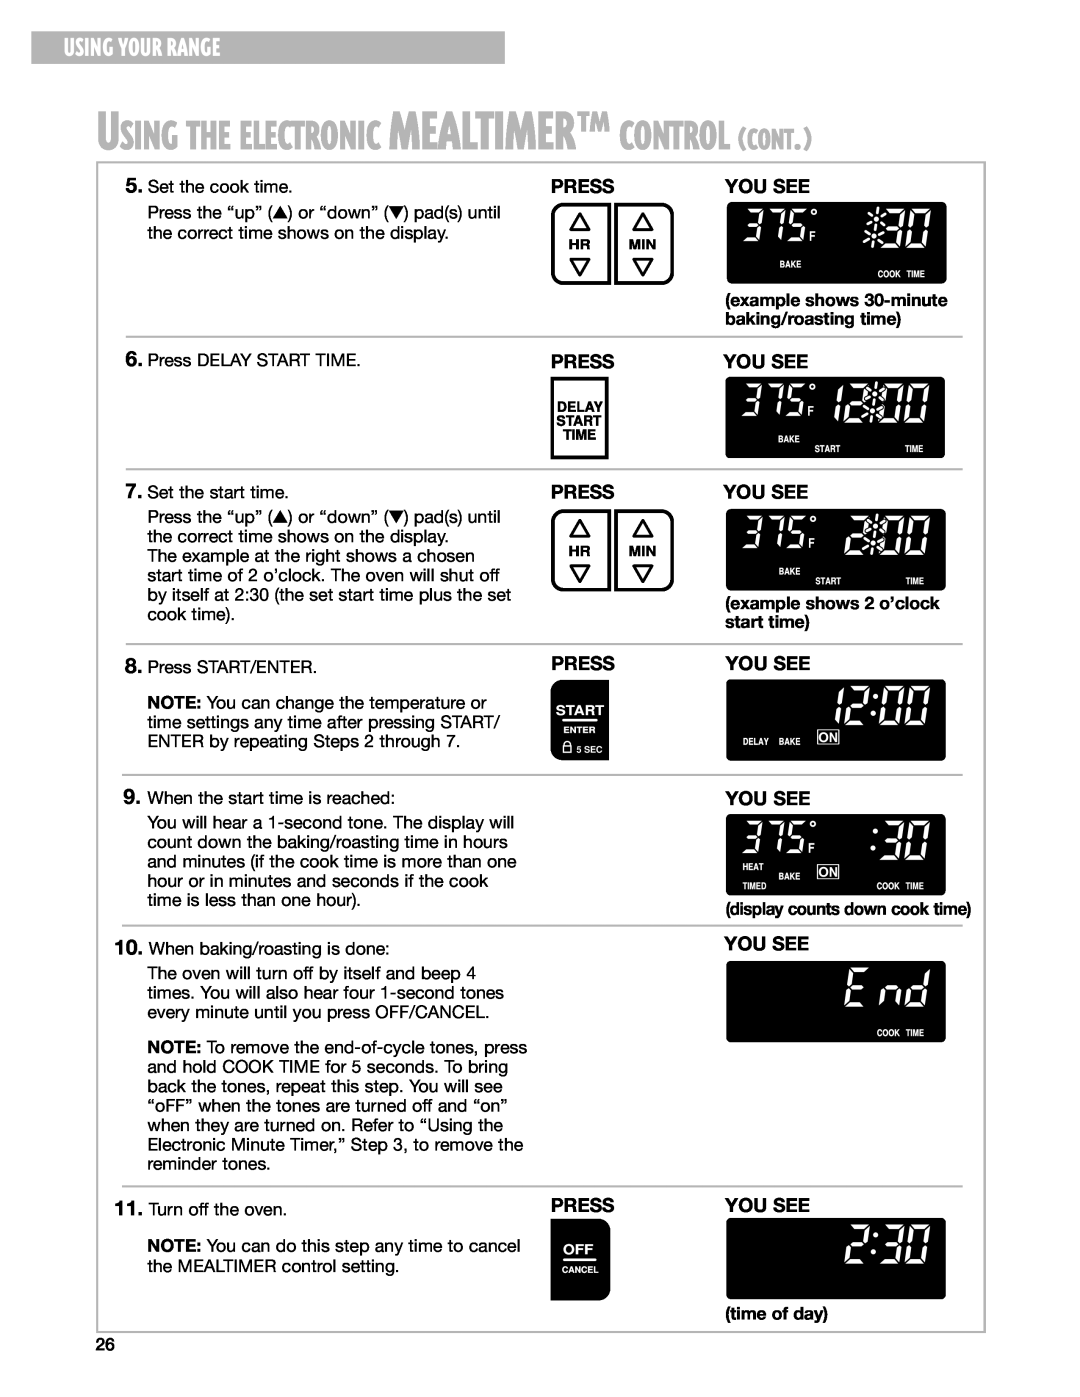 Whirlpool RF199LXH warranty Using The Electronic Mealtimerª Control Cont, Using Your Range, You See, Press 